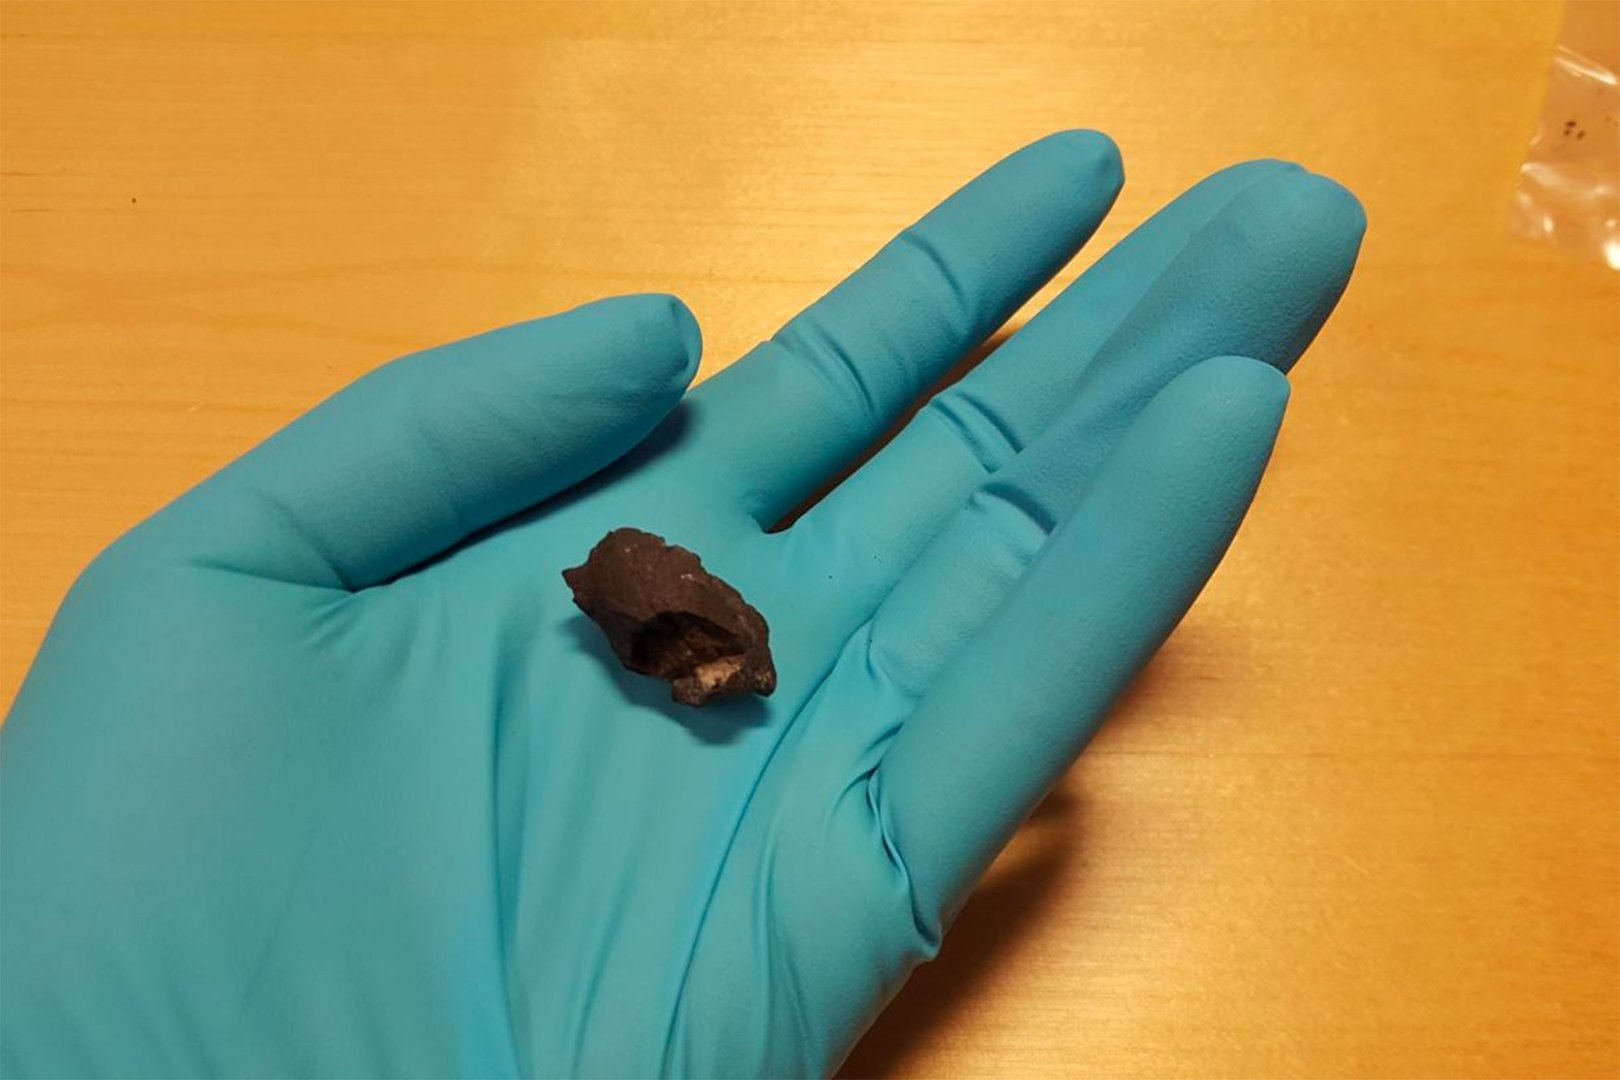 Revealing Stone Age Secrets: DNA Extracted from 10,000-Year-Old 'Chewing Gum